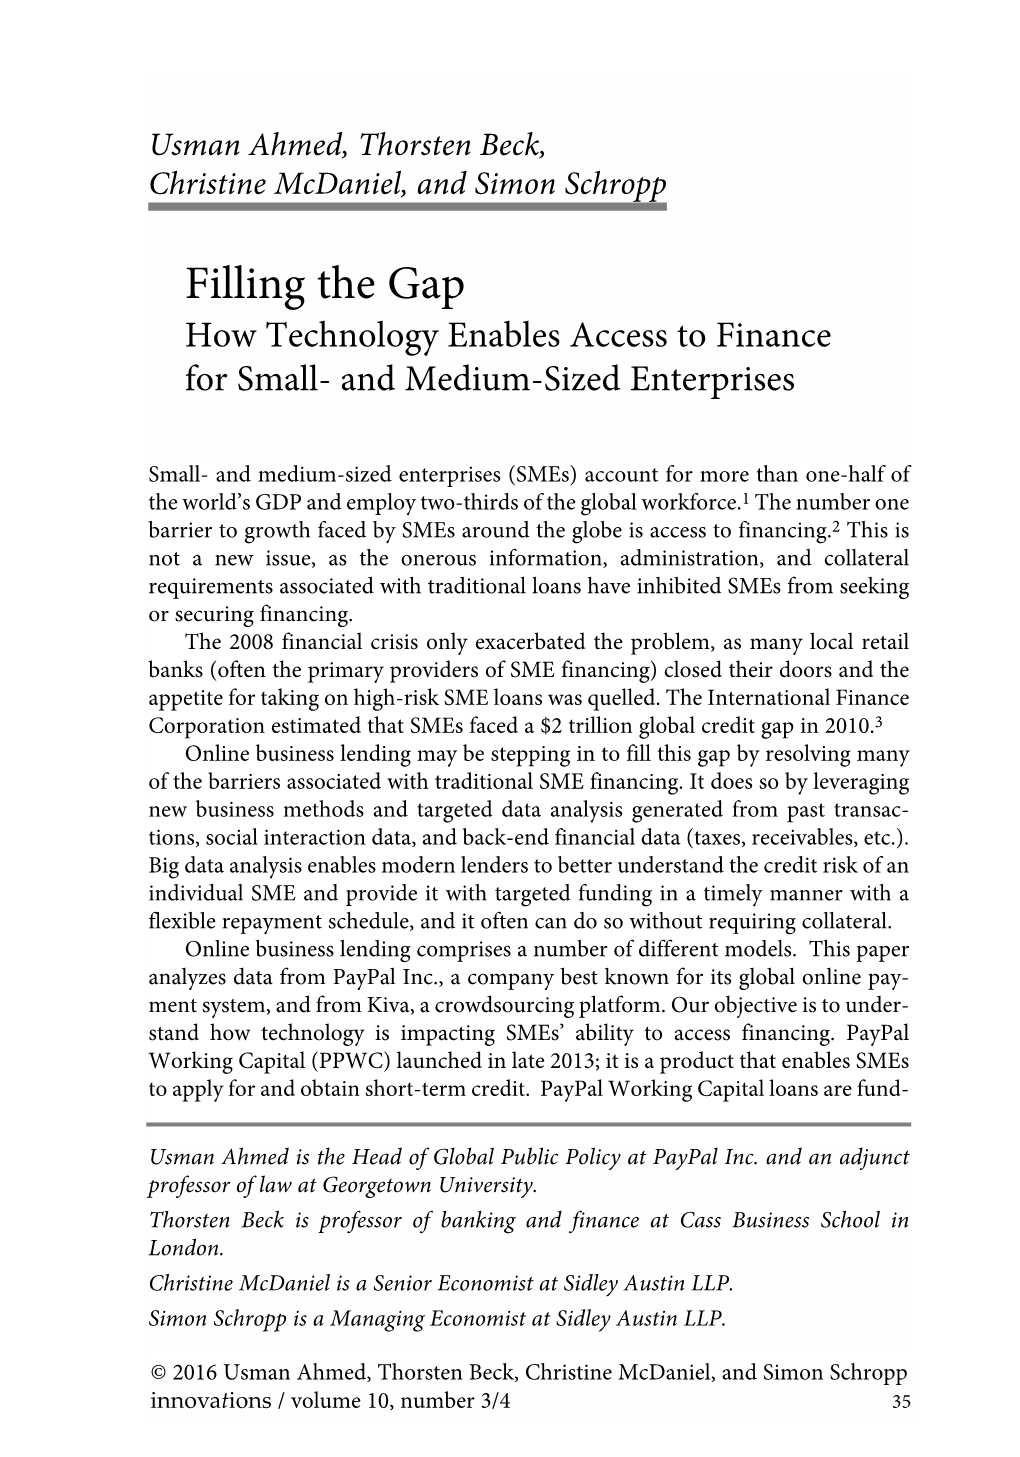 Filling the Gap: How Technology Enables Access to Finance for Small